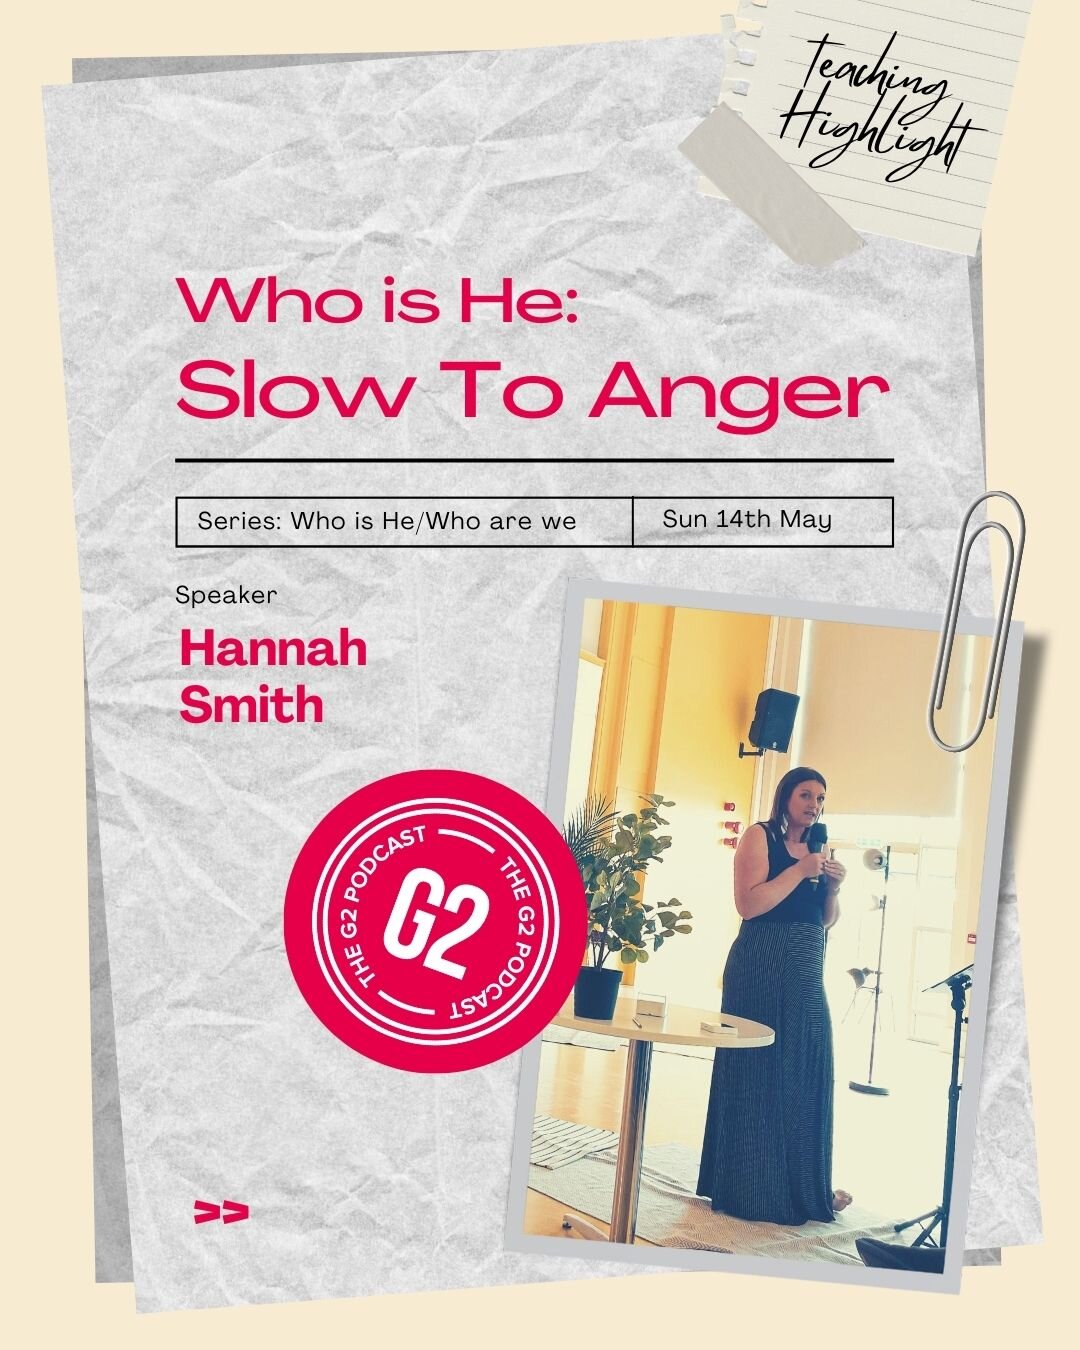 Here's the teaching highlight from Hannah's talk on Sunday, all about how God is slow to anger. If you missed it on Sunday or just want to listen back then do catchup via the G2 Podcast. Now available on Spotify or wherever you got your podcasts from